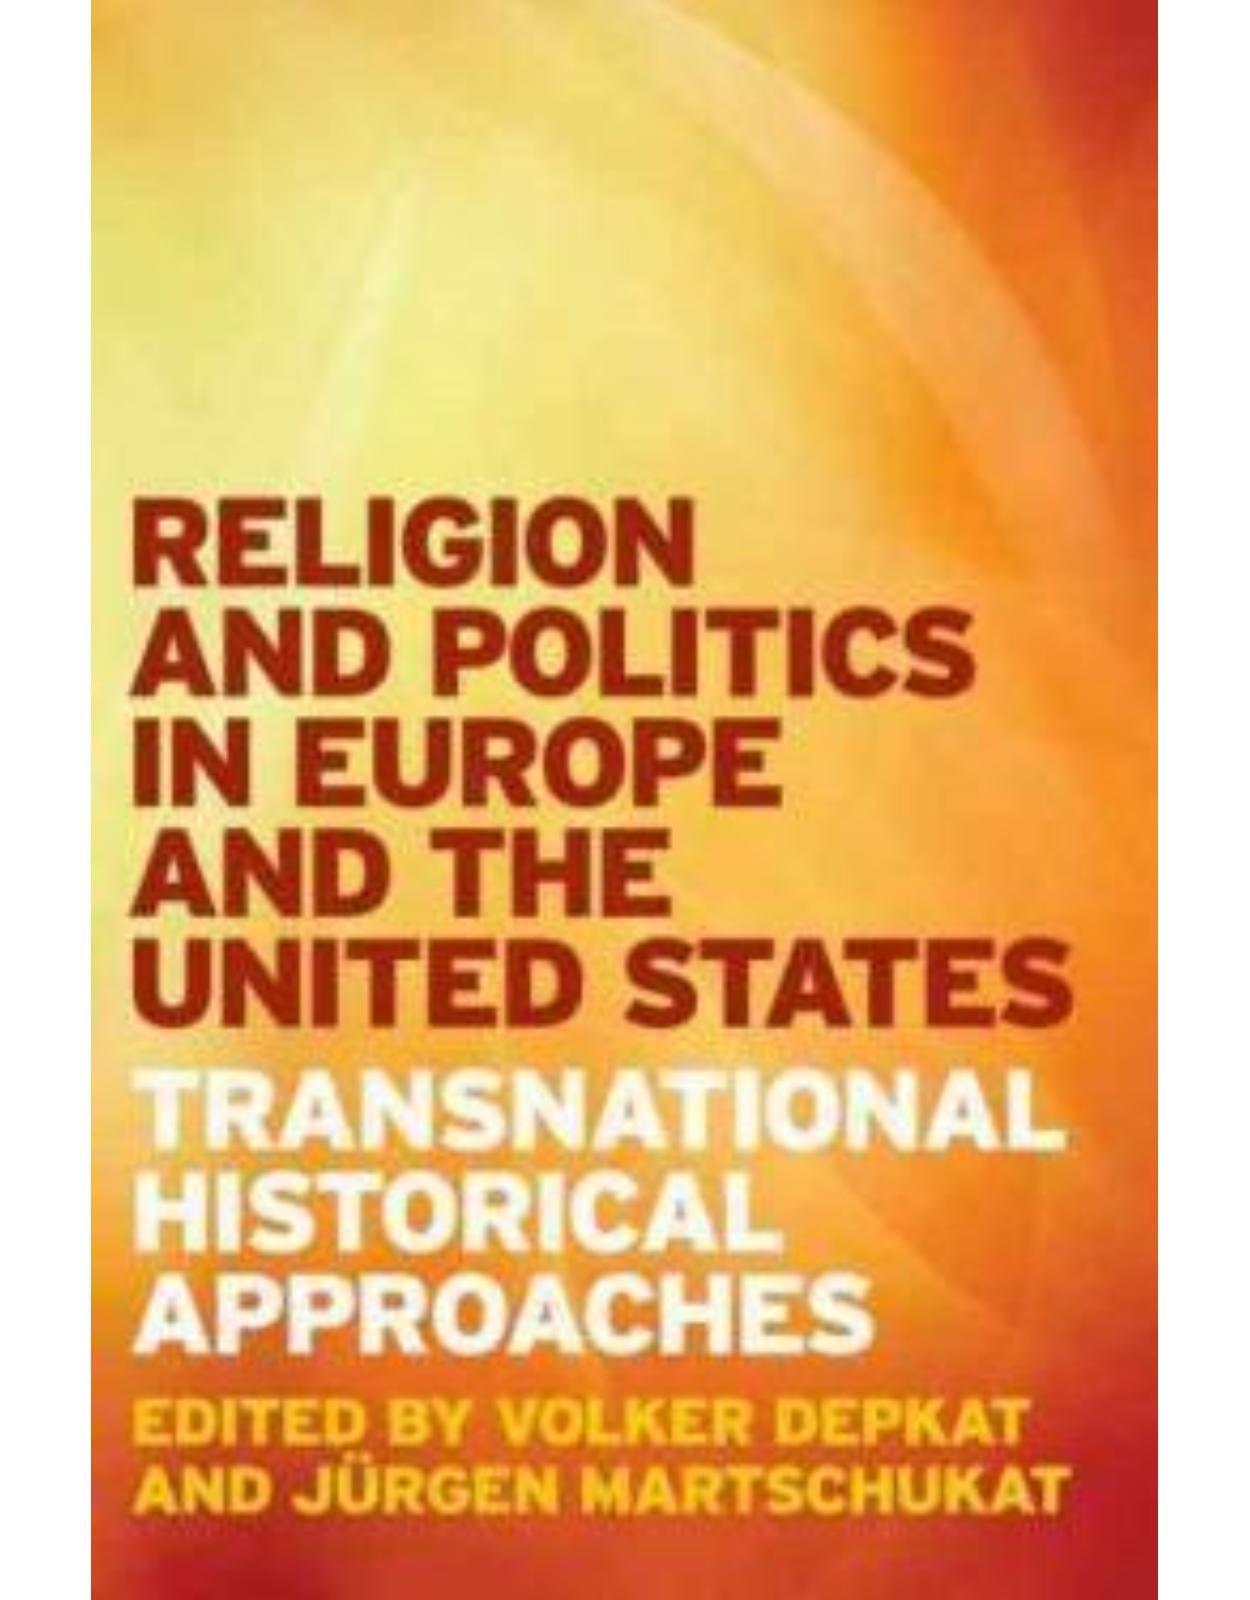 Religion and Politics in Europe and the United States. Transnational Historical Approaches